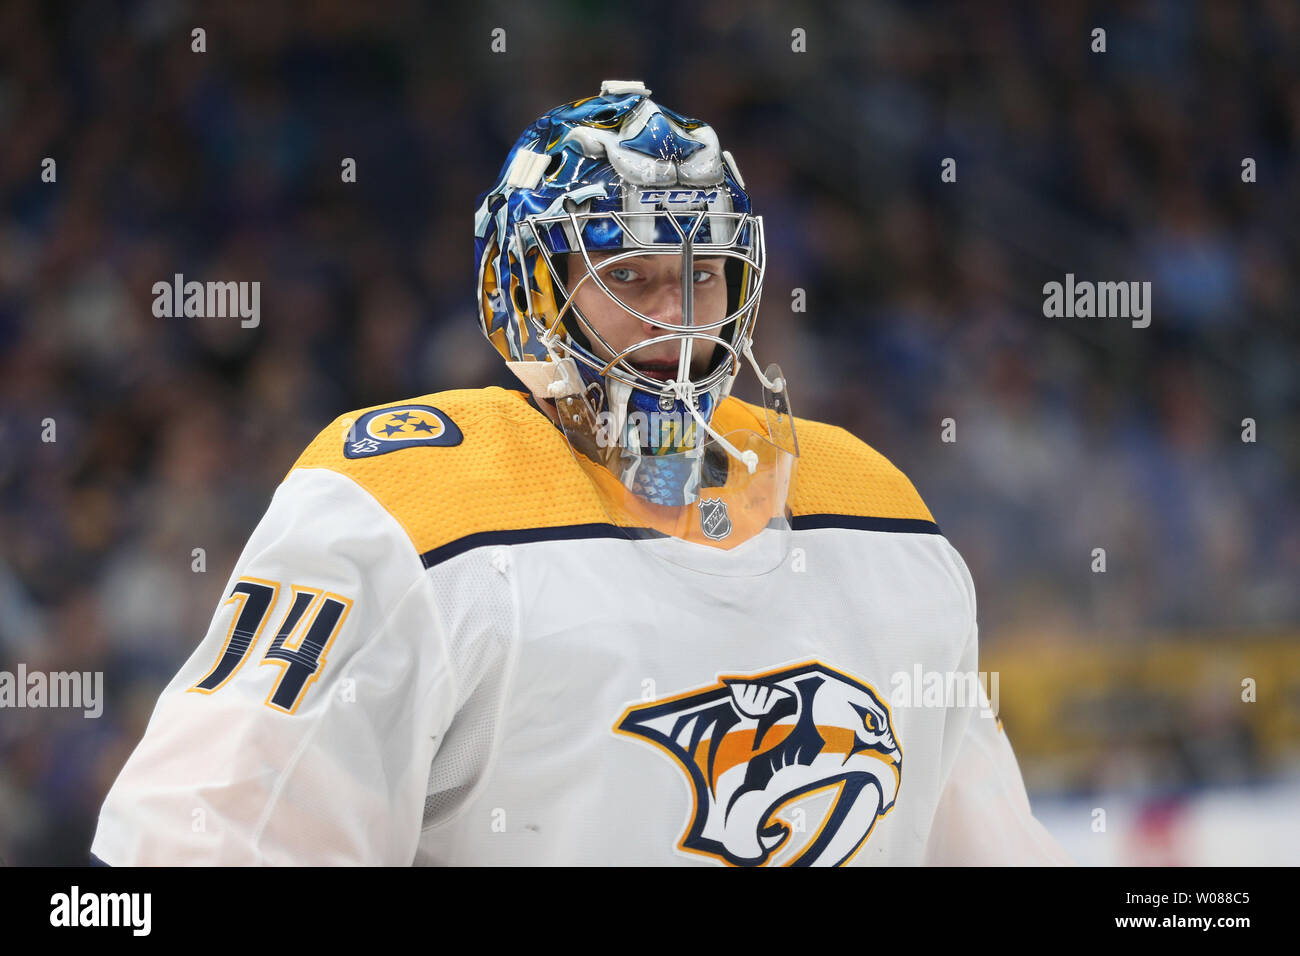 Nashville Predators goaltender Juuse Saros of Finland skates to his bench  in the first period against the St. Louis Blues at the Enterprise Center in  St. Louis on February 26, 2019. Photo